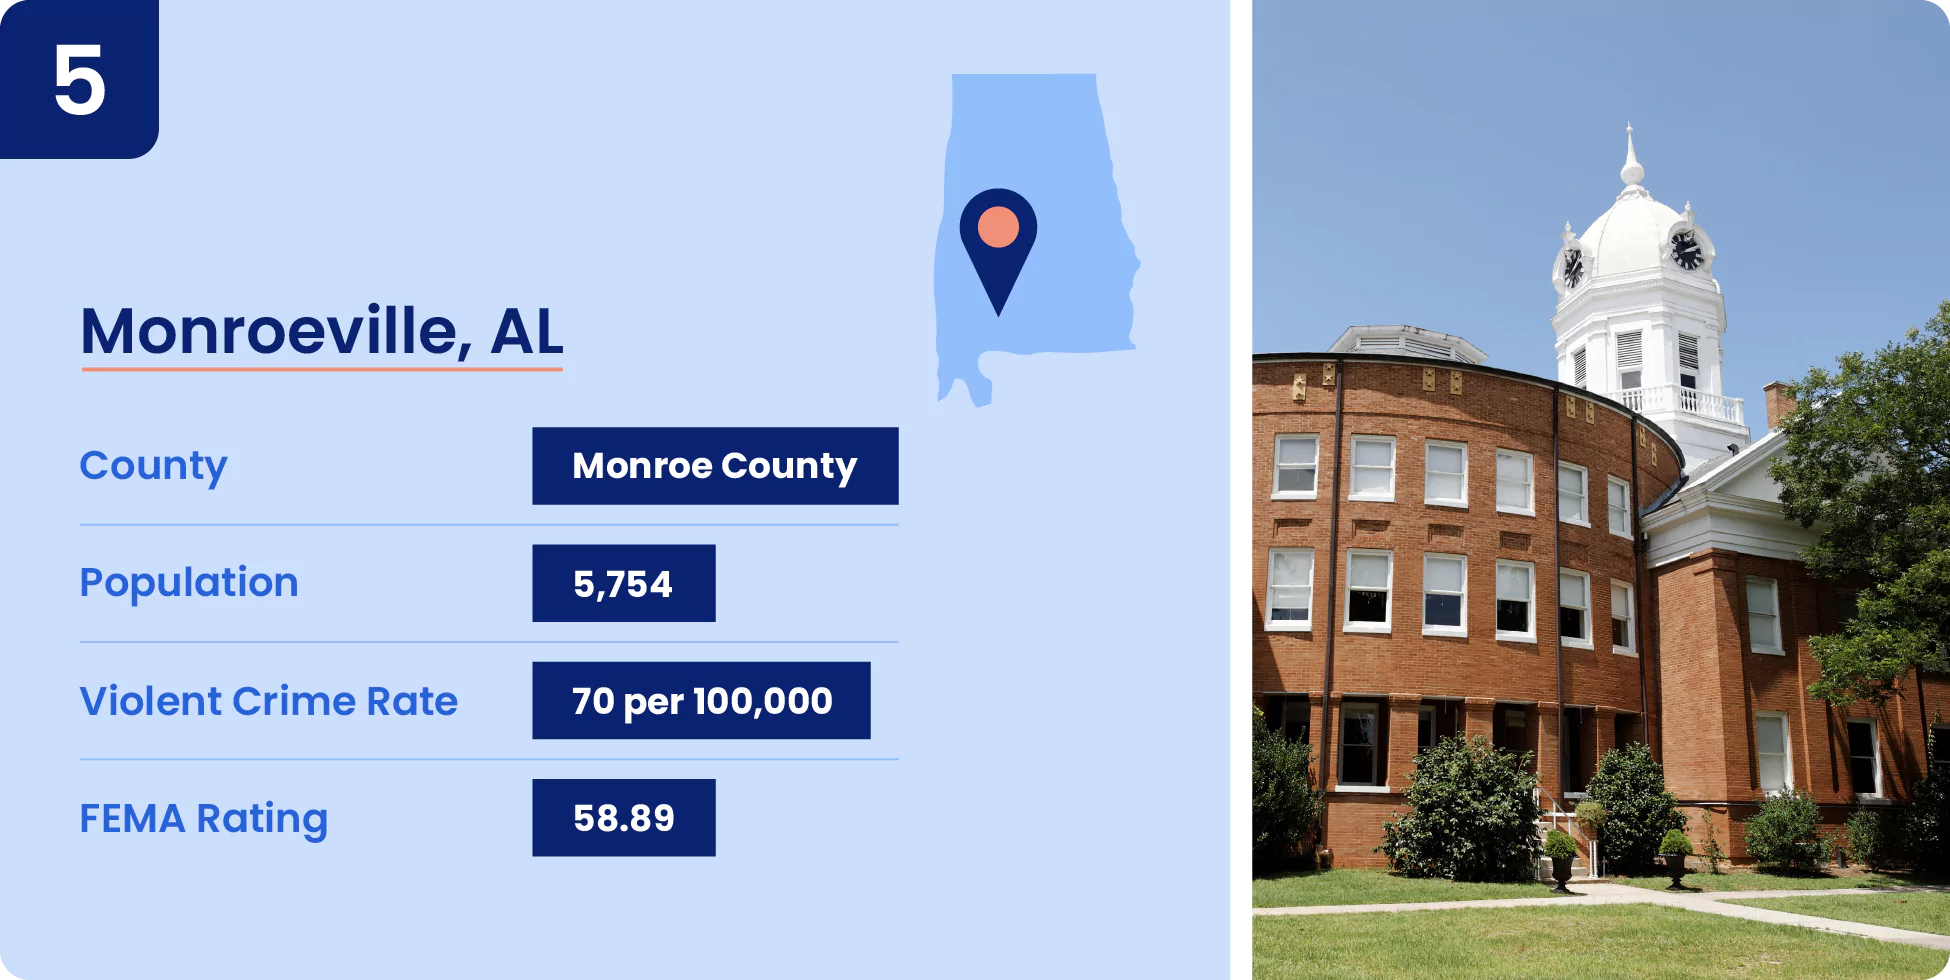 Image shows key information for one of the safest cities in Alabama, Monroeville.